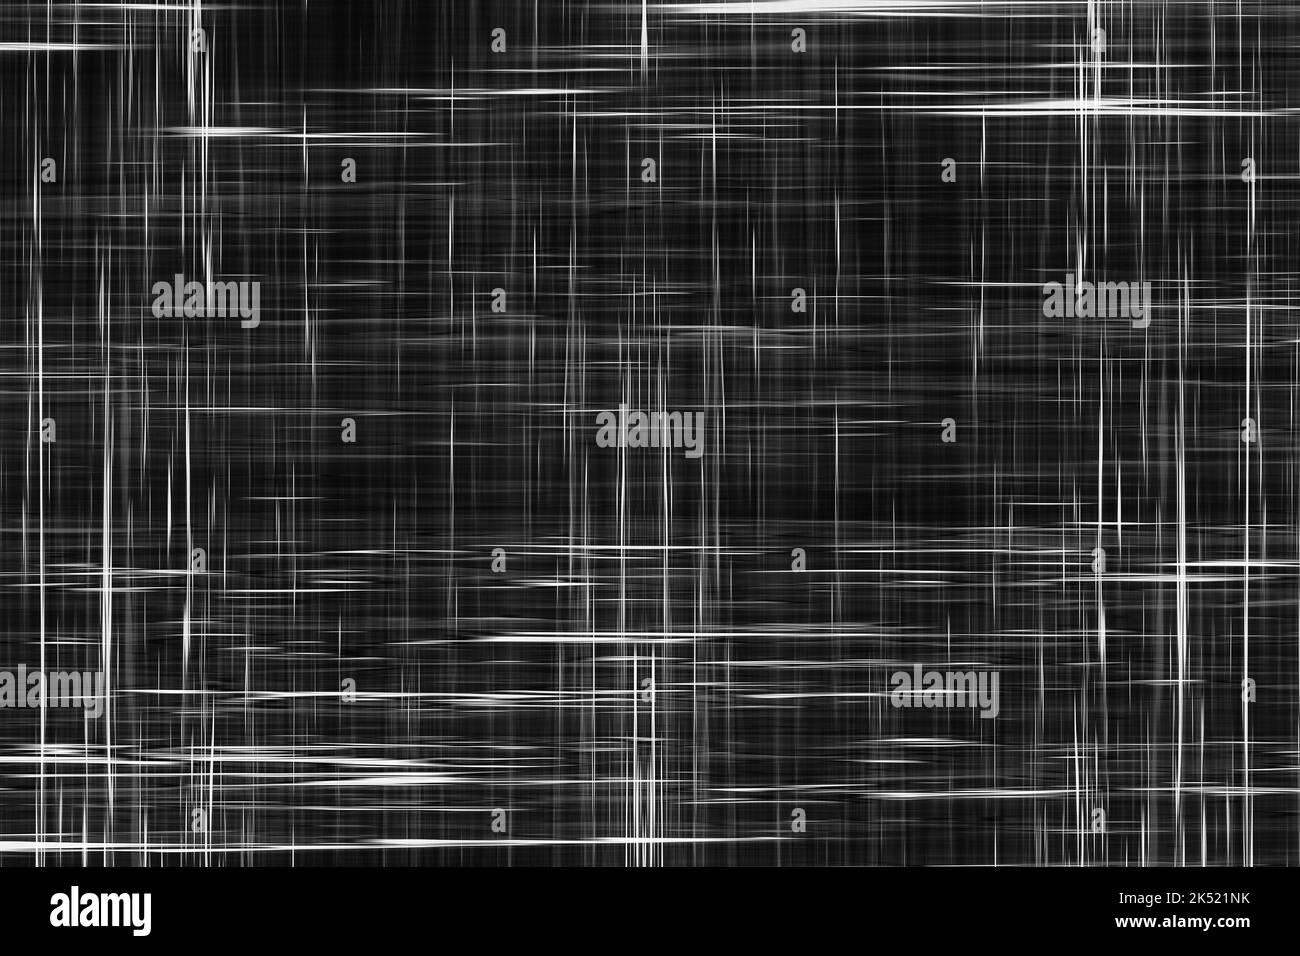 Black and white pattern of abstract graphic lines for design in your work background. Stock Photo